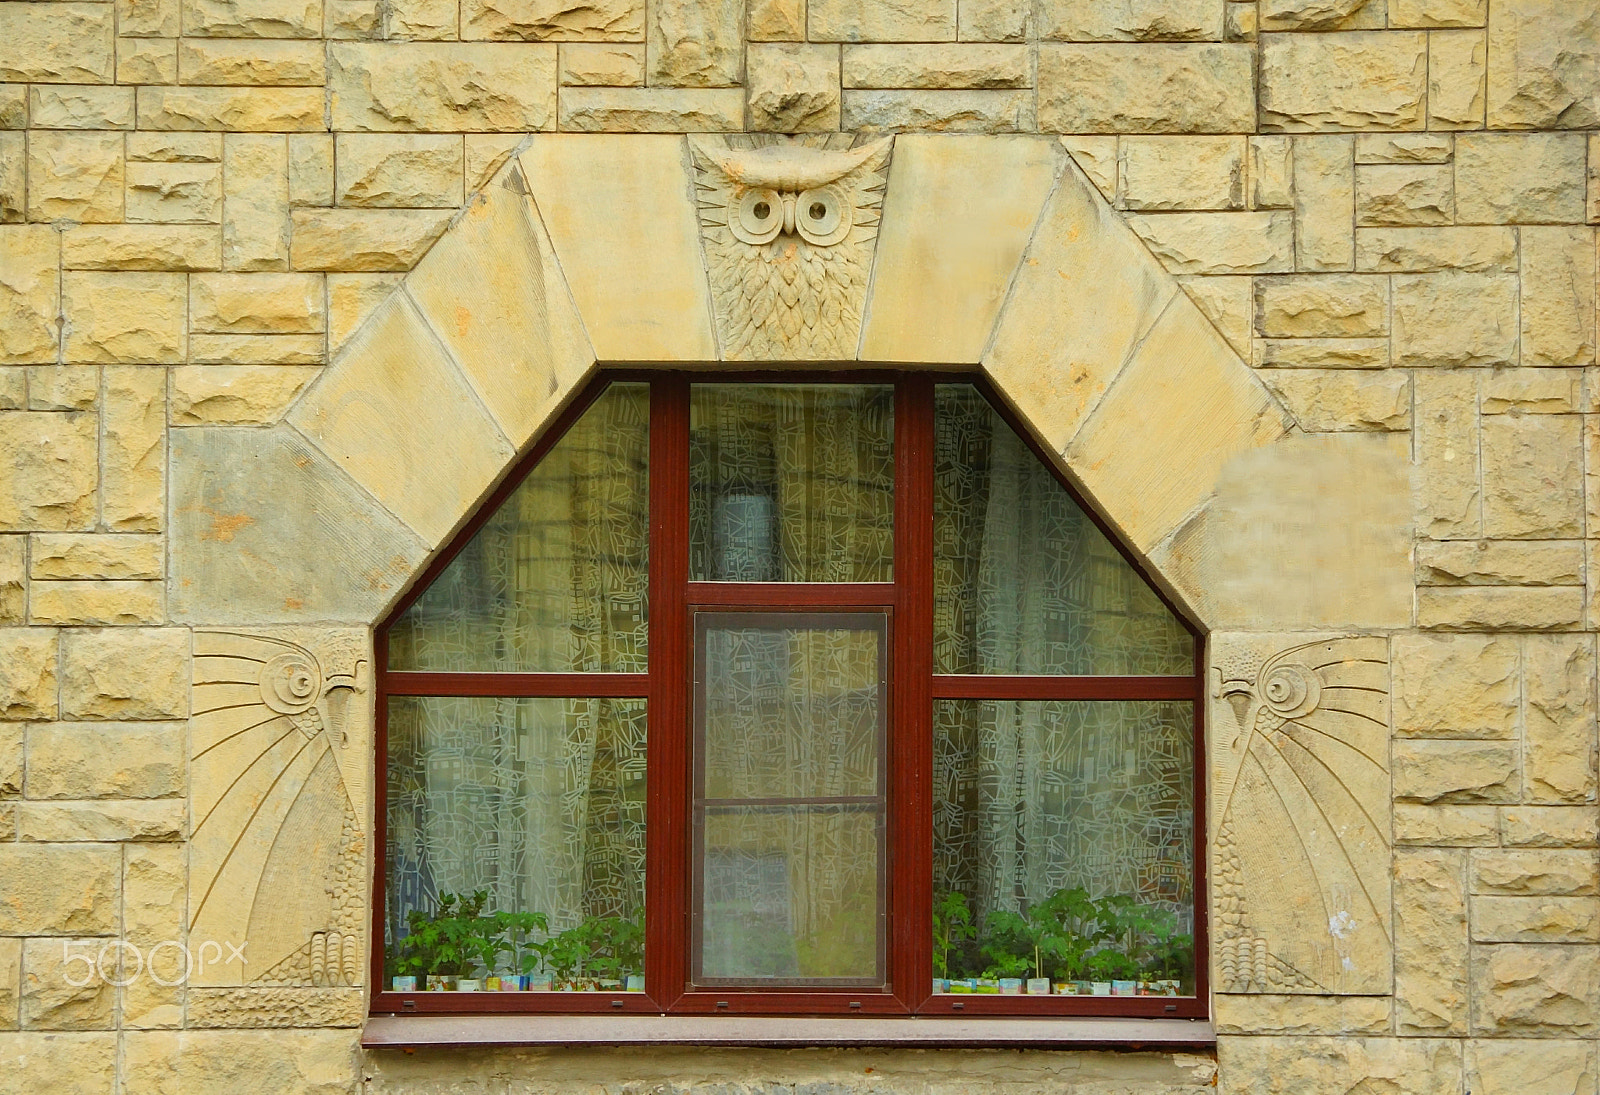 Sony SLT-A77 sample photo. Fragment of the facade of a house with a window and an owl in the art nouveau style photography